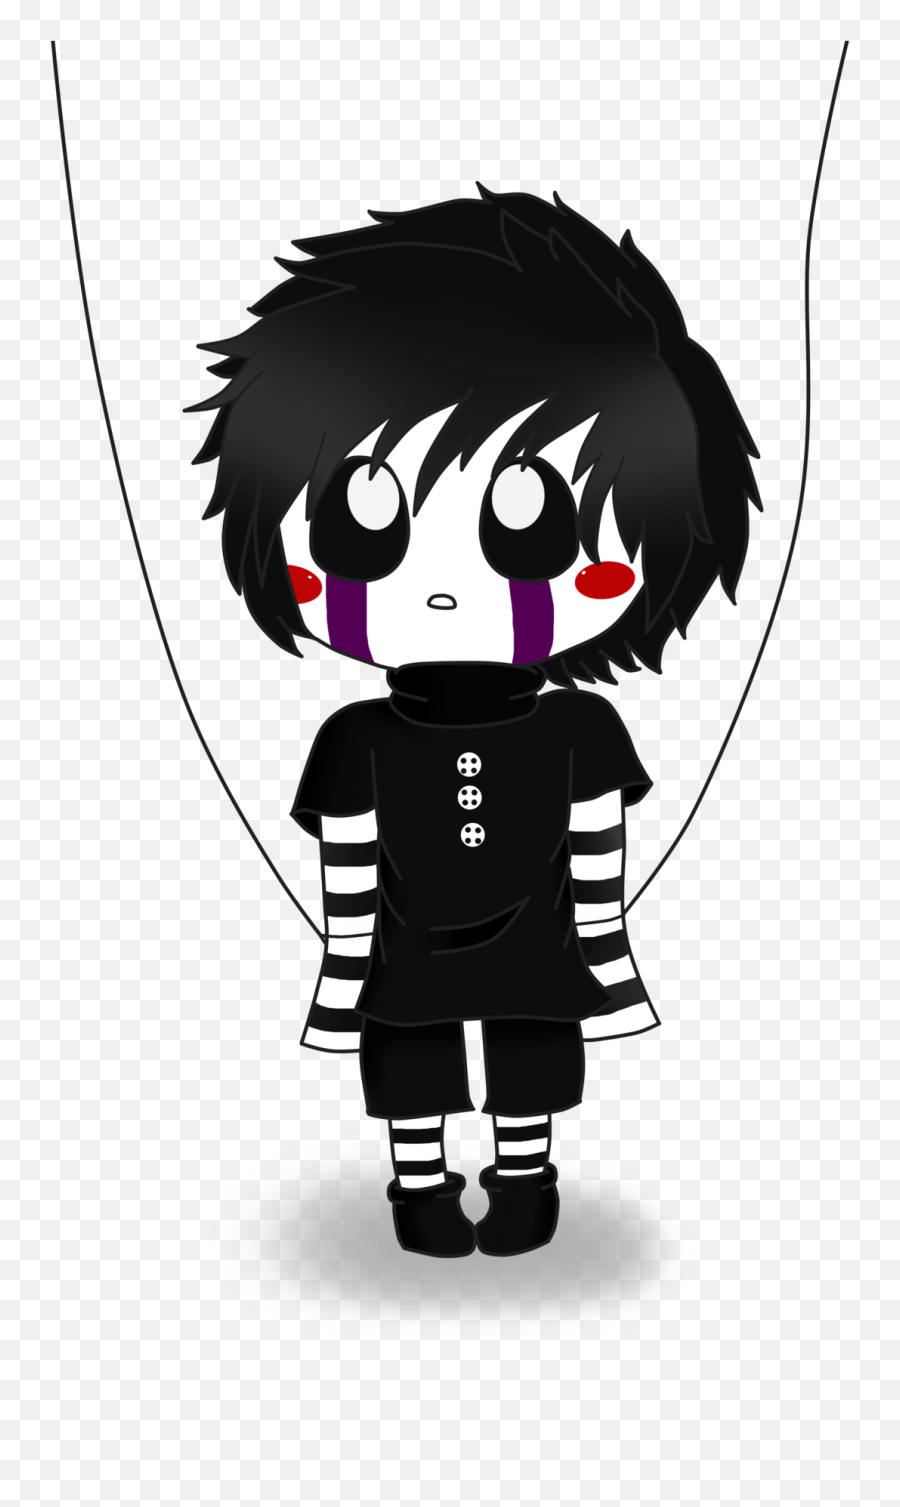 Png Transparent Library Chibi Anime - Anime Puppet Master Fnaf,Puppet Png